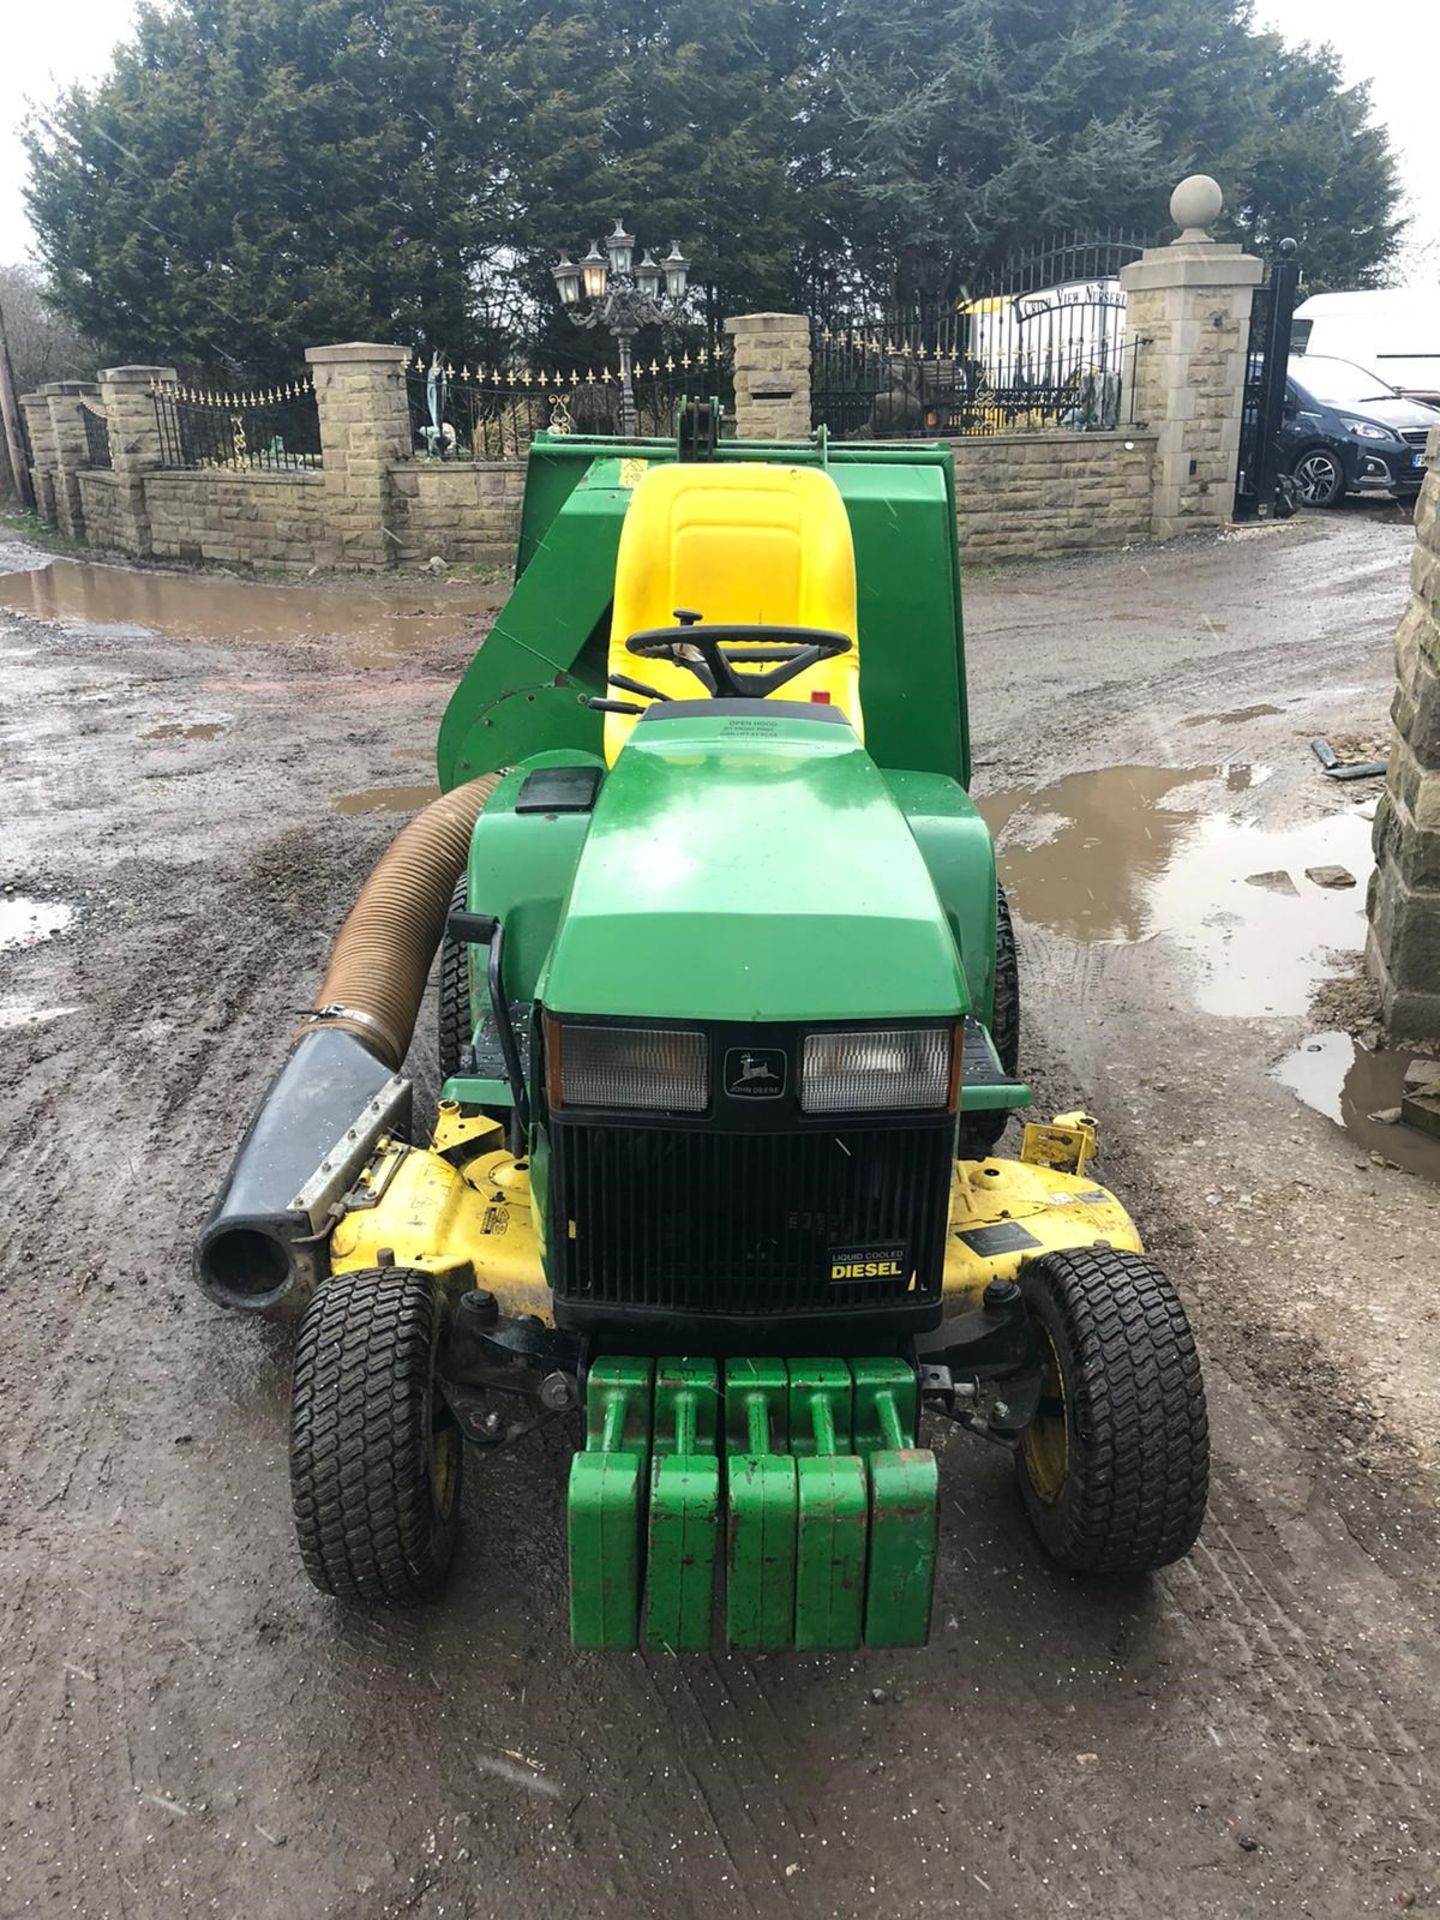 JOHN DEERE 415 RIDE ON LAWN MOWER, RUNS & WORKS, CUTS AND COLLECTS WELL *NO VAT* - Image 6 of 8